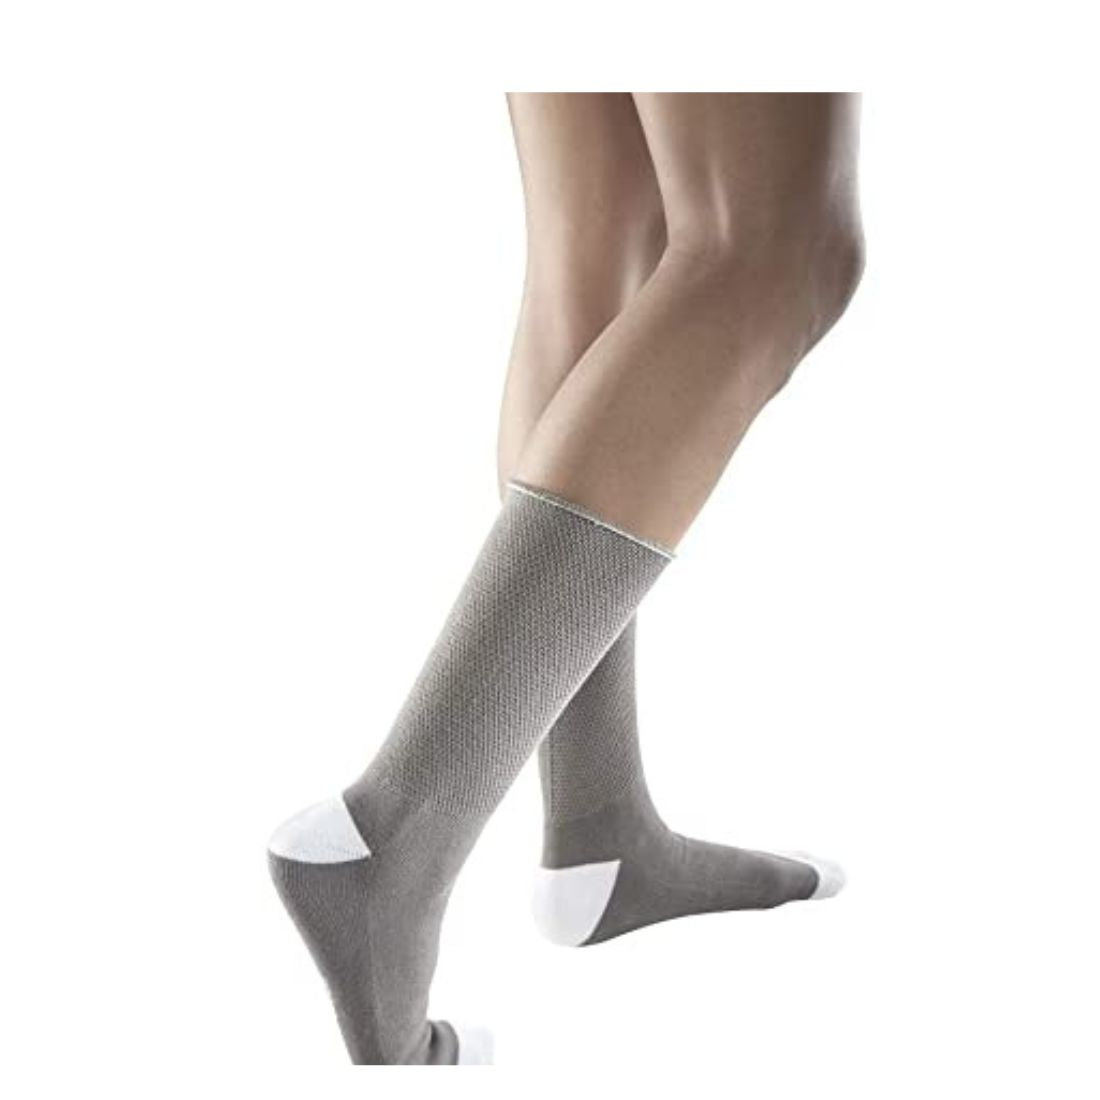 Diabetic socks are specially designed to reduce the risk of foot injury, keep the feet dry and maximize blood flow